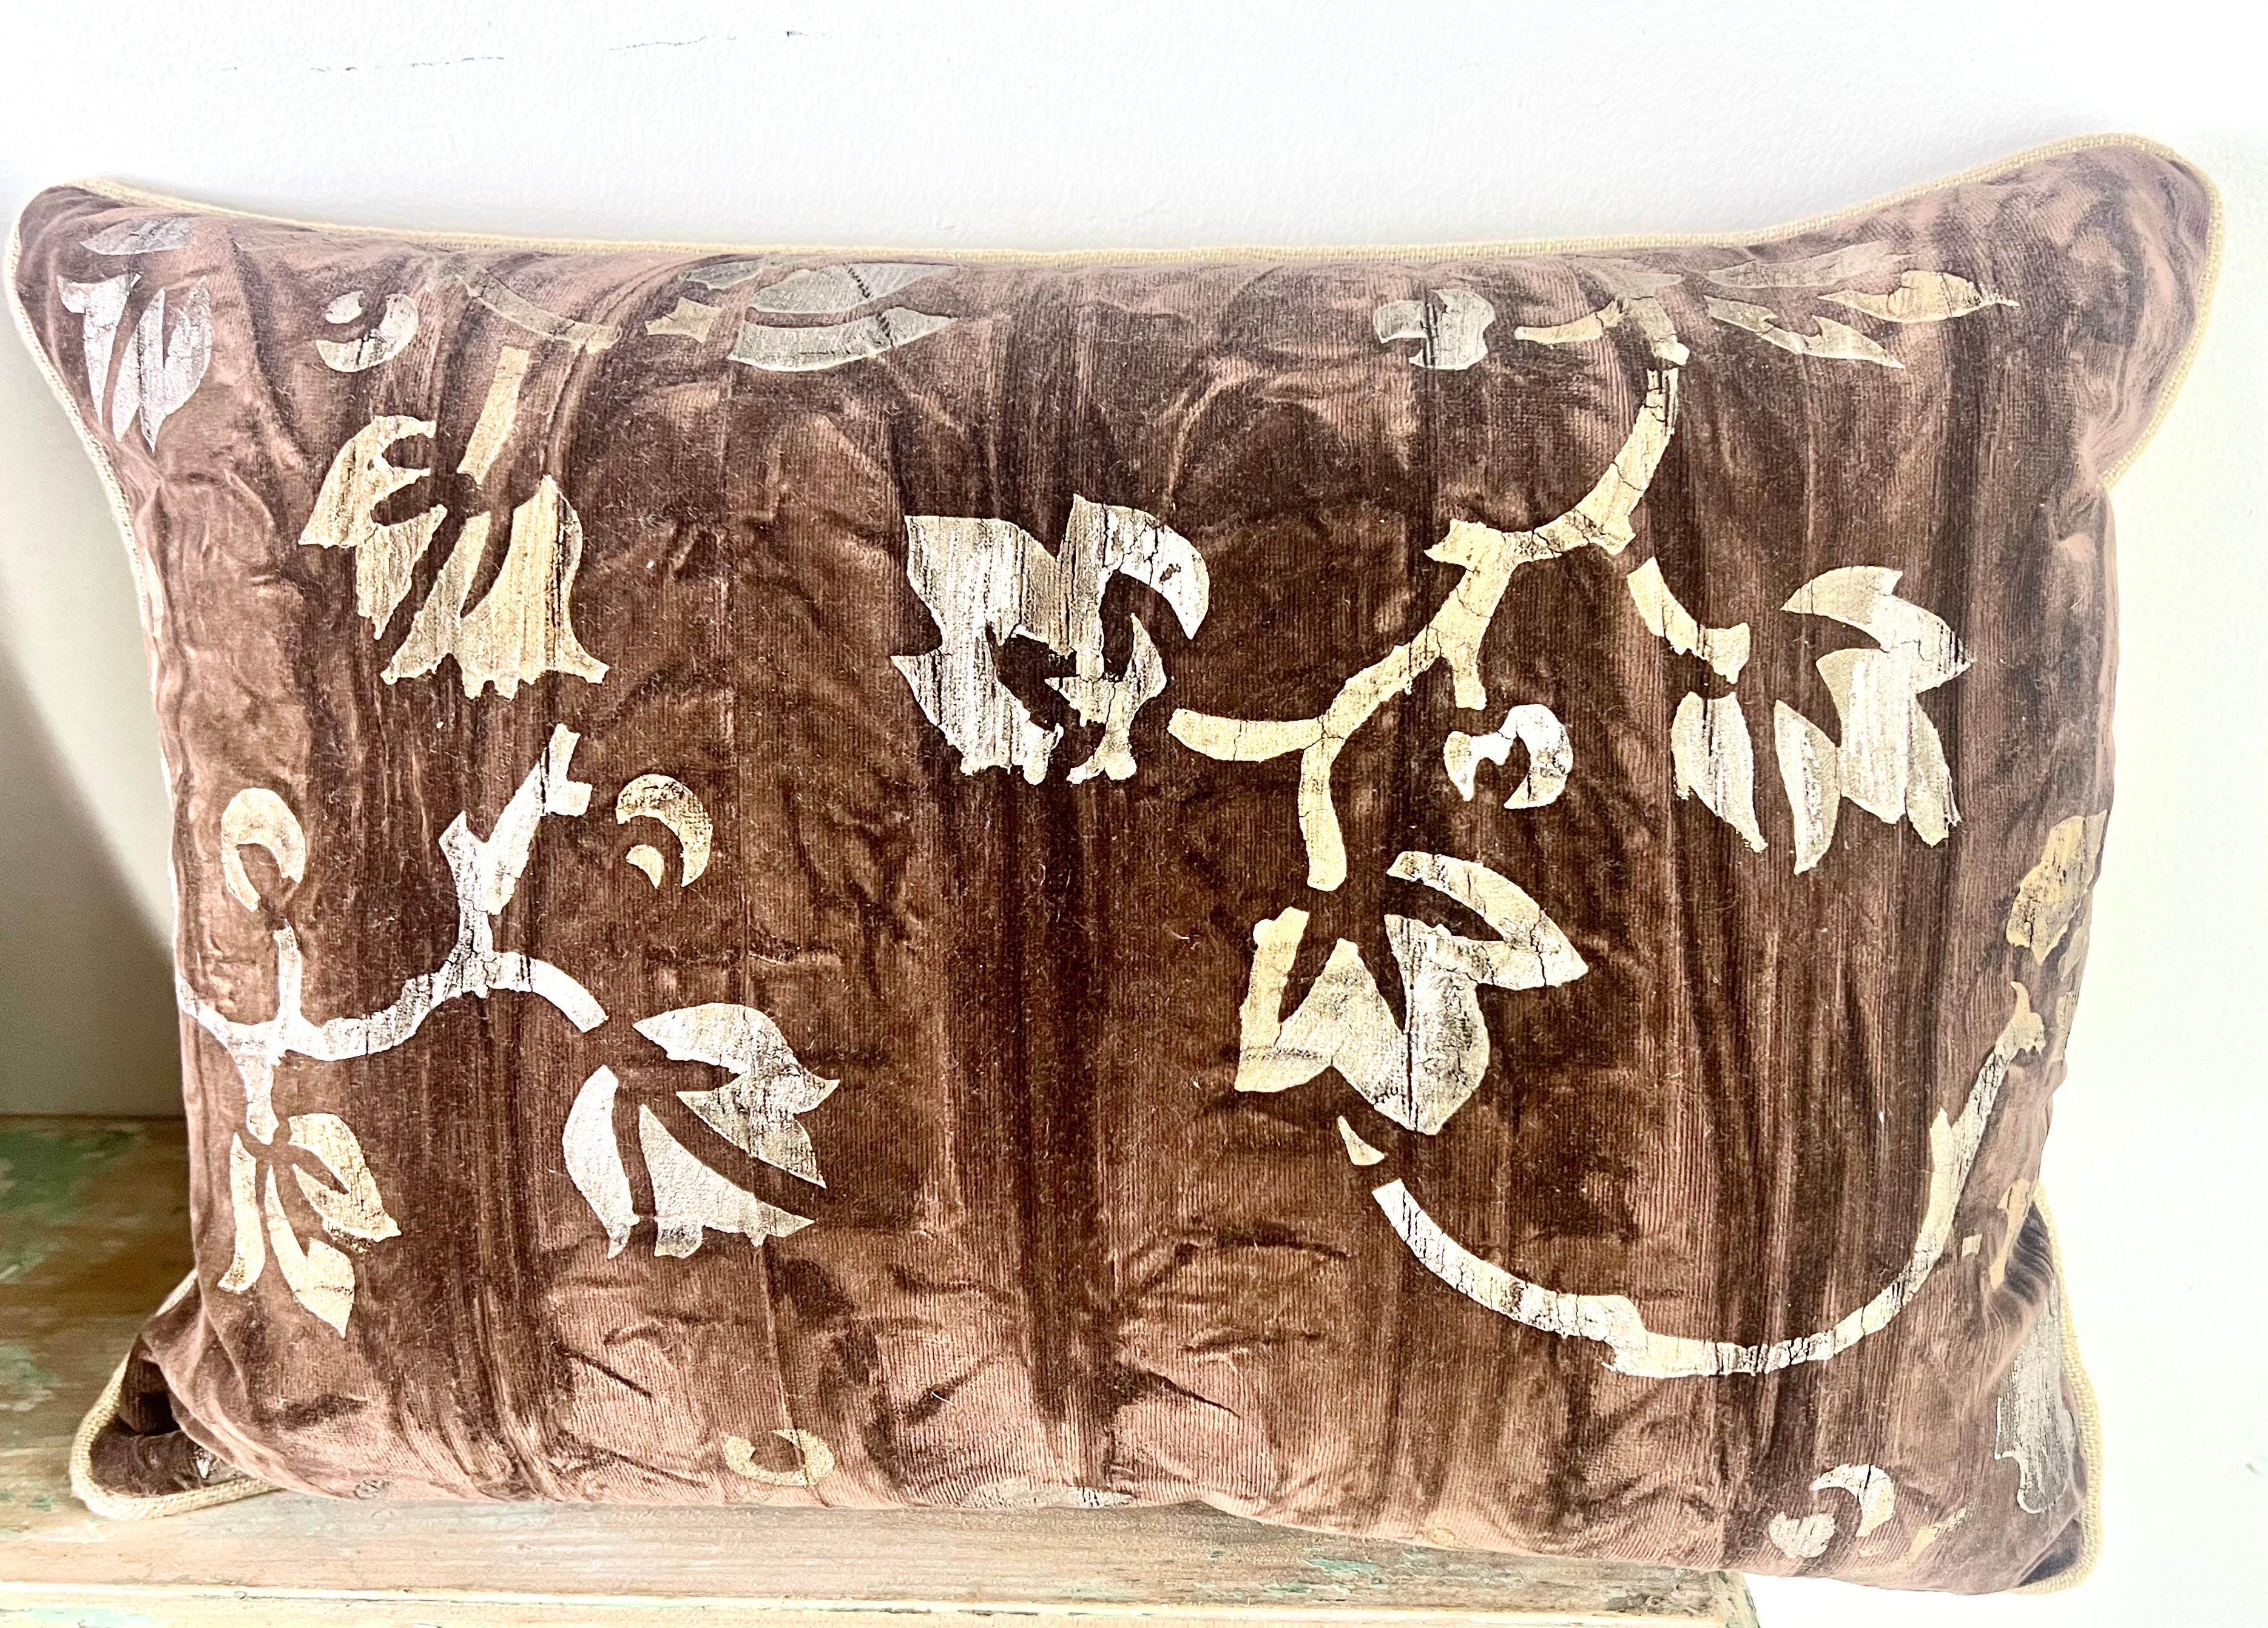 Pair of brown velvet NOMI textile pillows.  The fronts are stenciled with metallic gold & silver design.  Soft butter colored linen backs.  Down filled inserts.